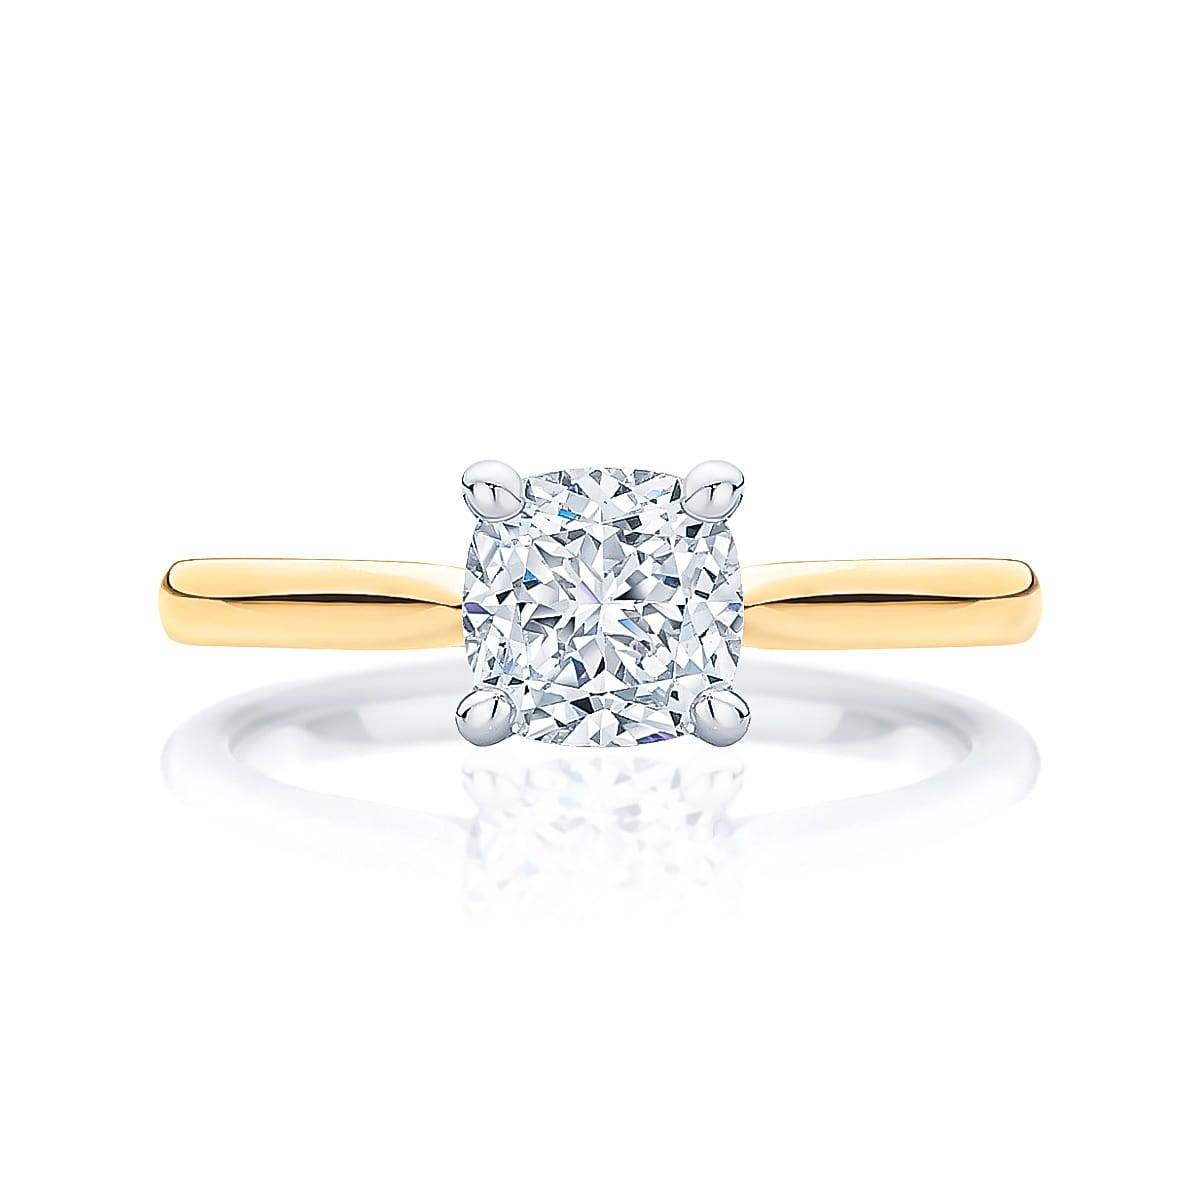 Cushion cut diamond engagement ring yellow gold solitaire